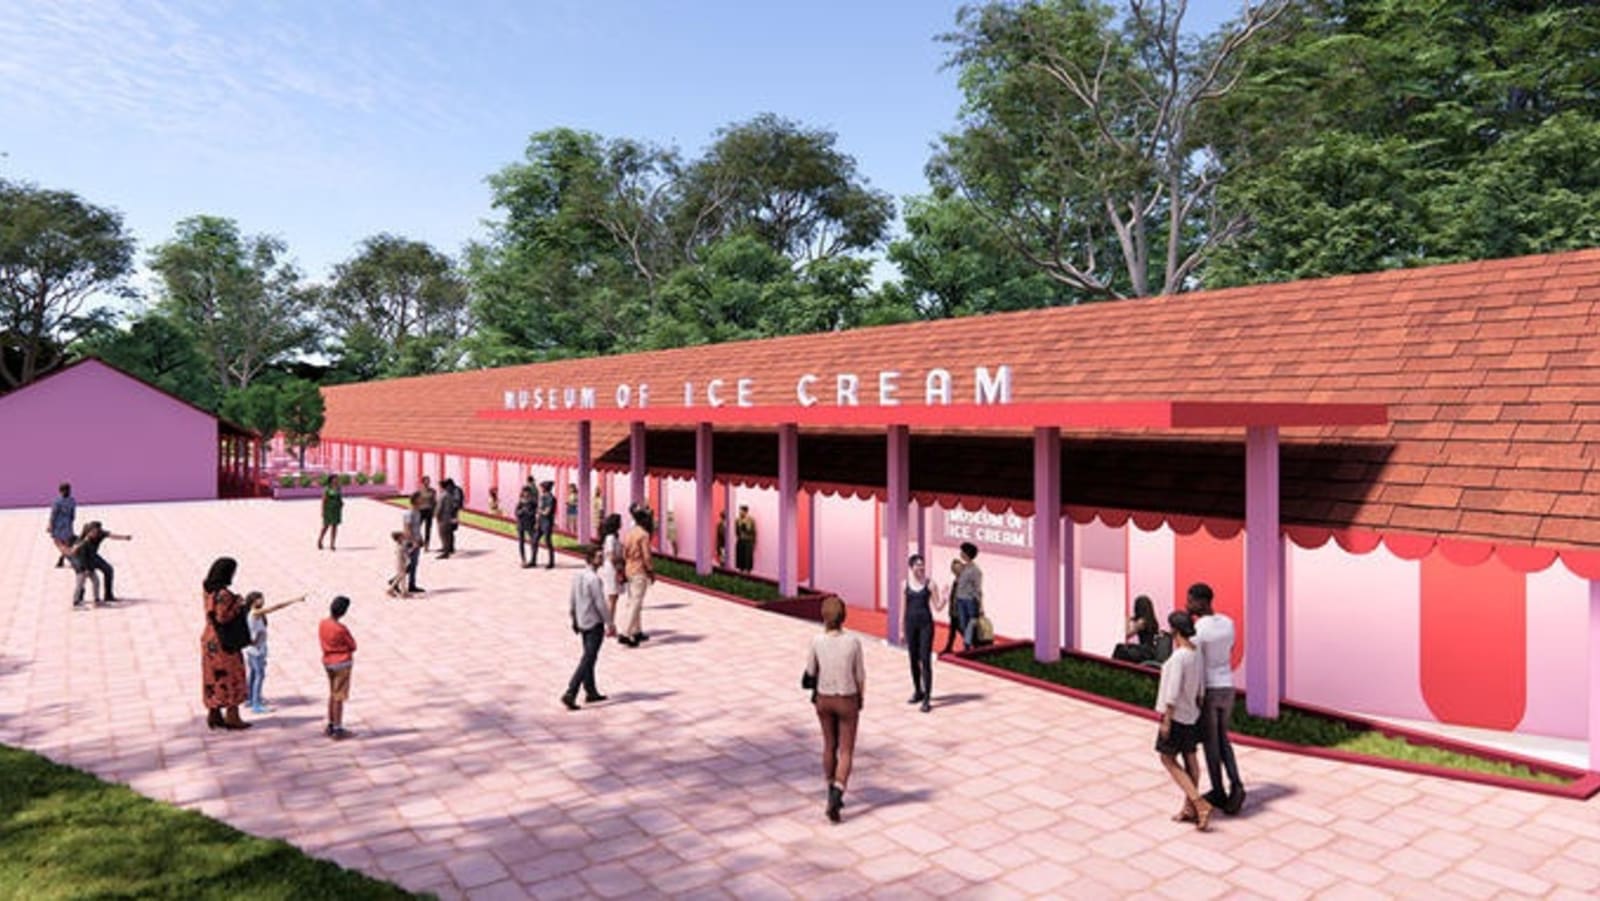 rs-10-artist-rendering-of-the-facade-at-the-upcoming-museum-of-ice-cream-singapore.jpg